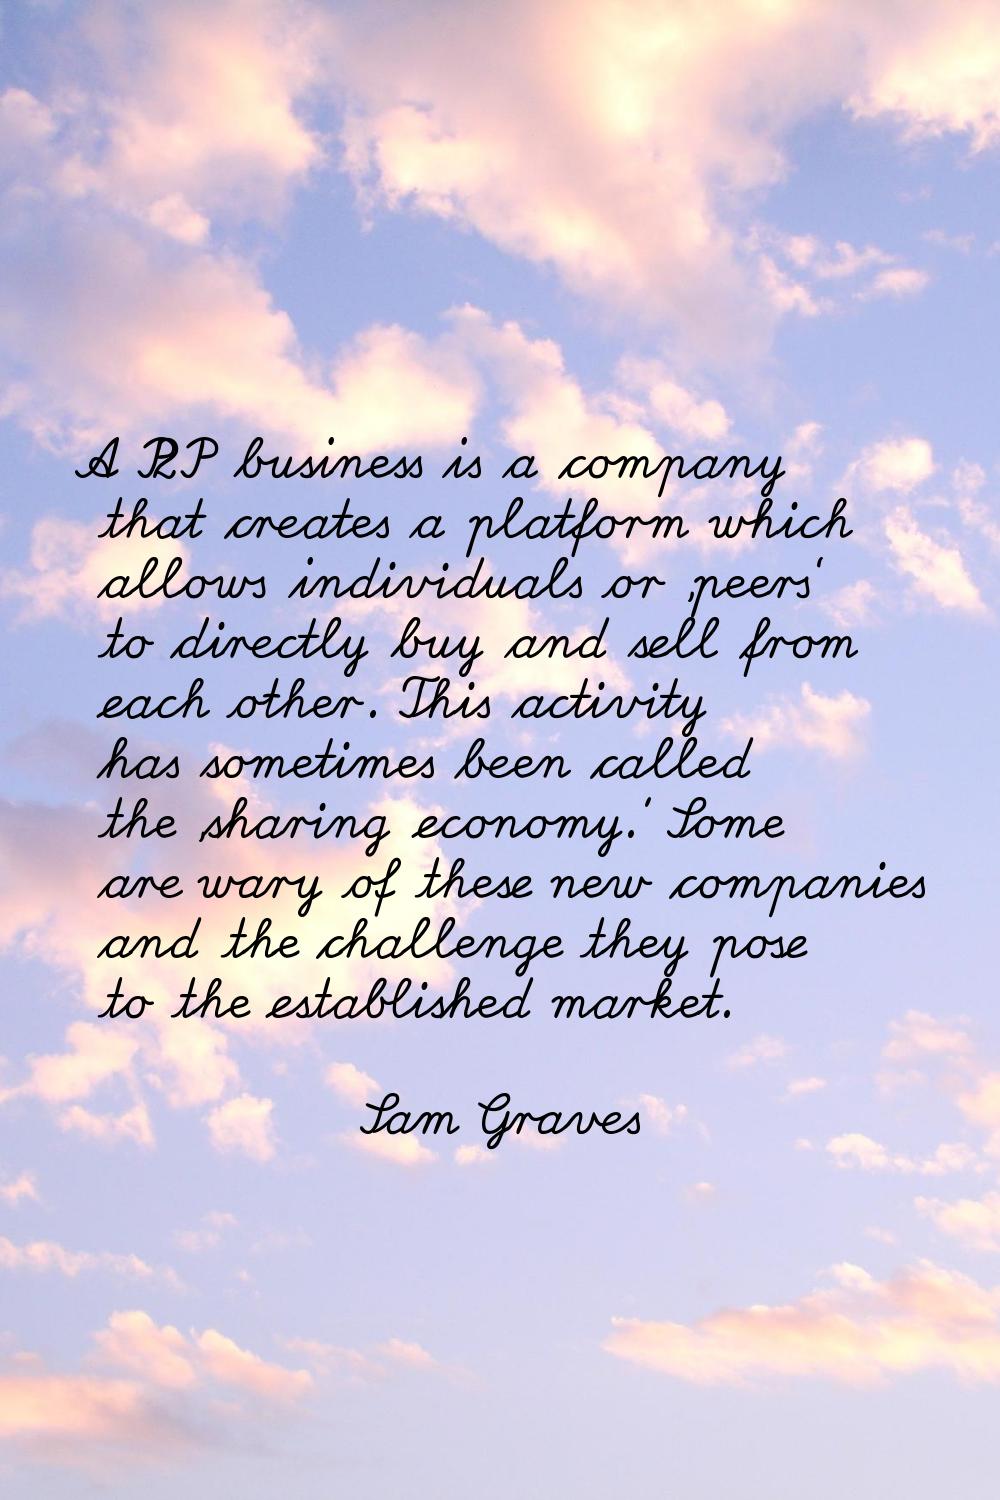 A P2P business is a company that creates a platform which allows individuals or 'peers' to directly